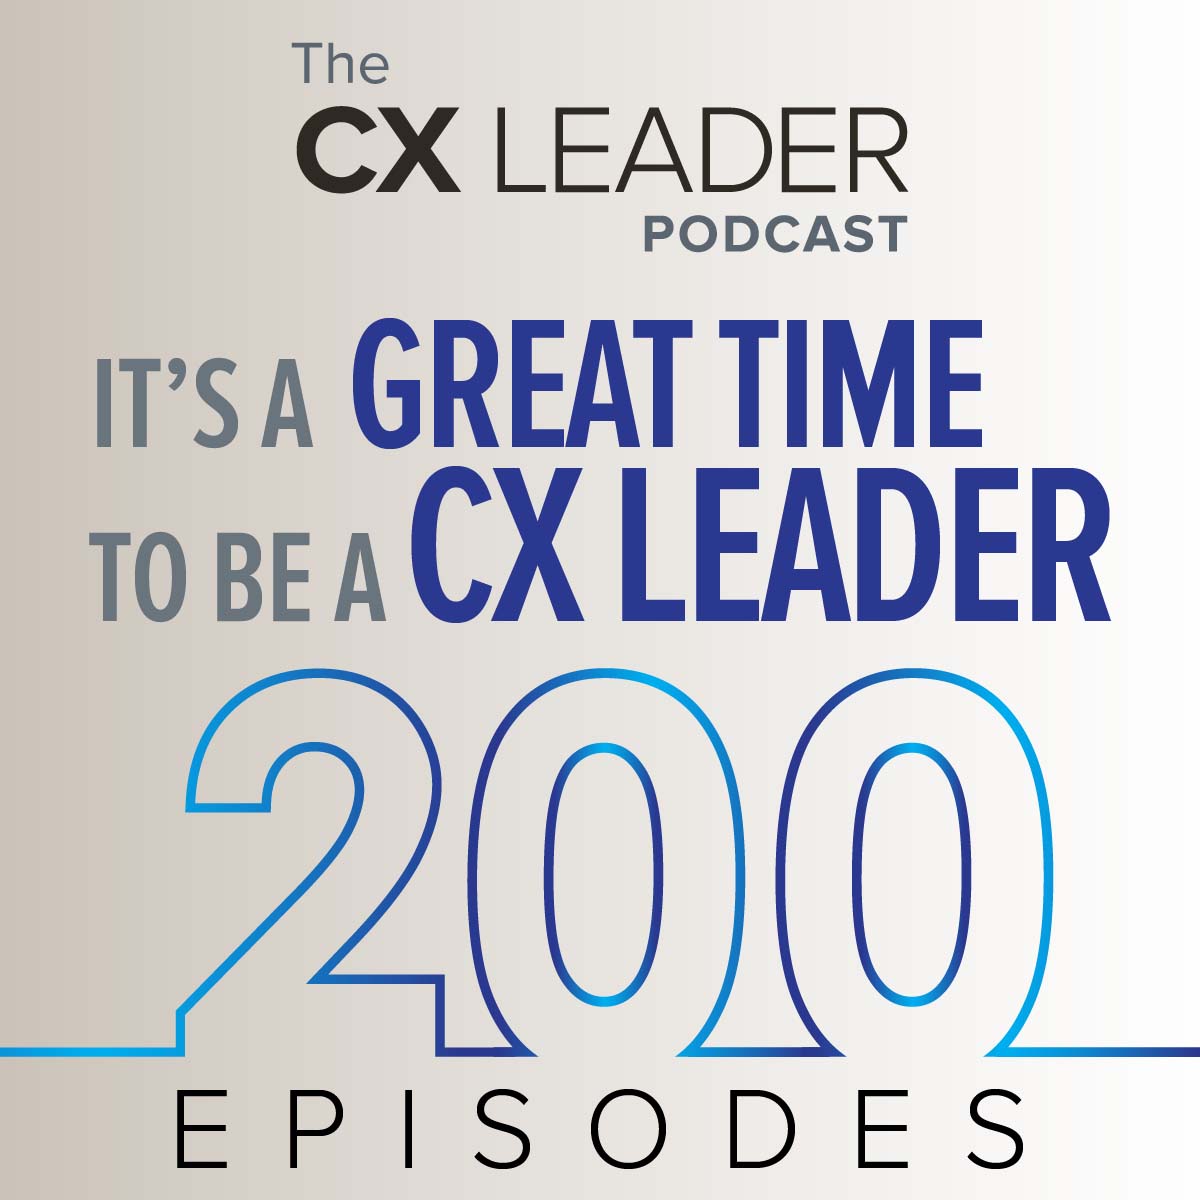 It’s a Great Time to be a CX Leader